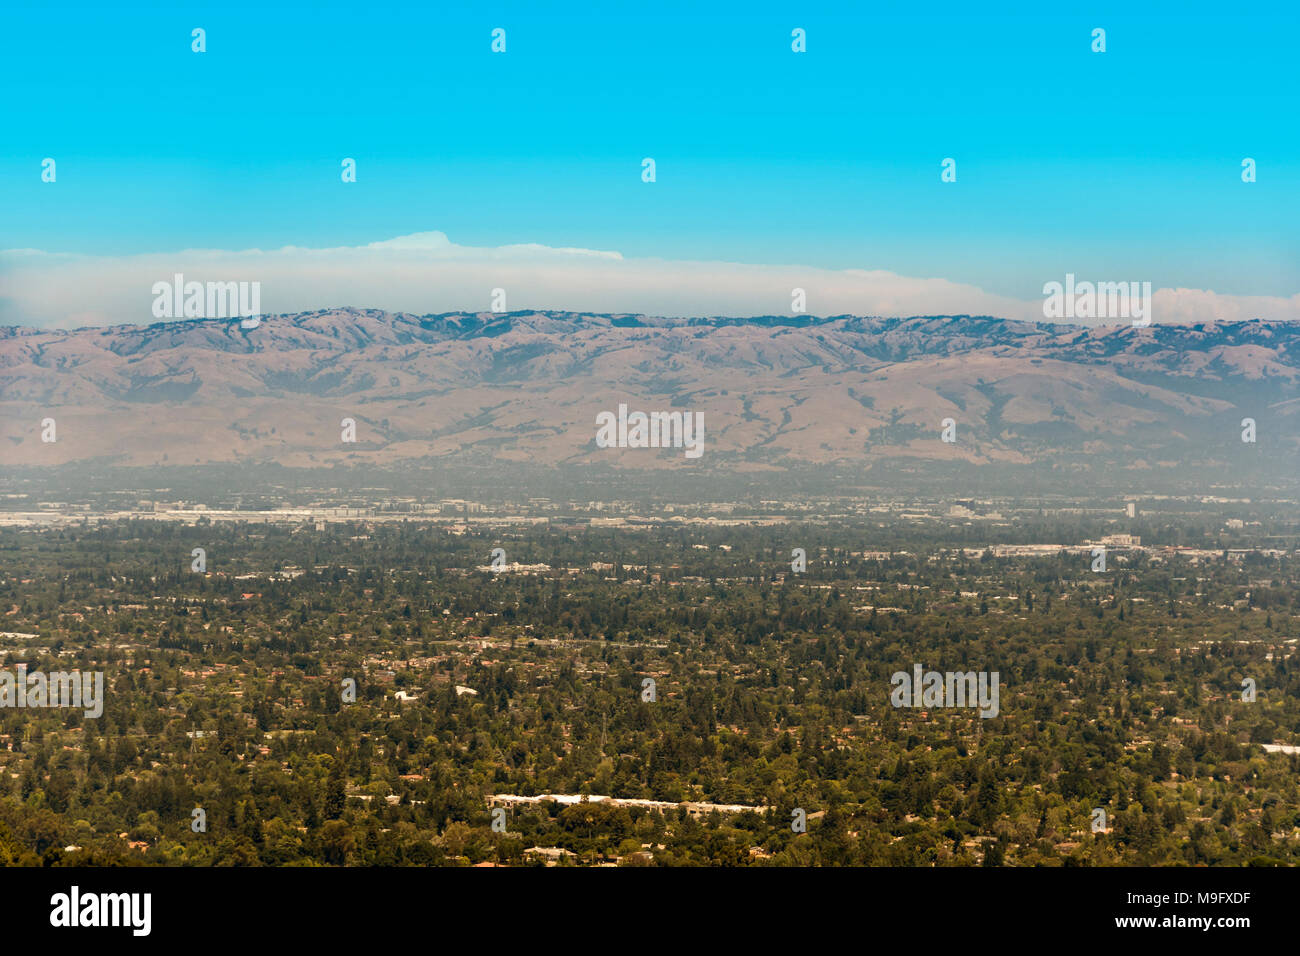 South San Francisco Bay, also called Silicon Valley, with visible smog above the area on a sunny day. The part we see on the image is south San Jose. Stock Photo